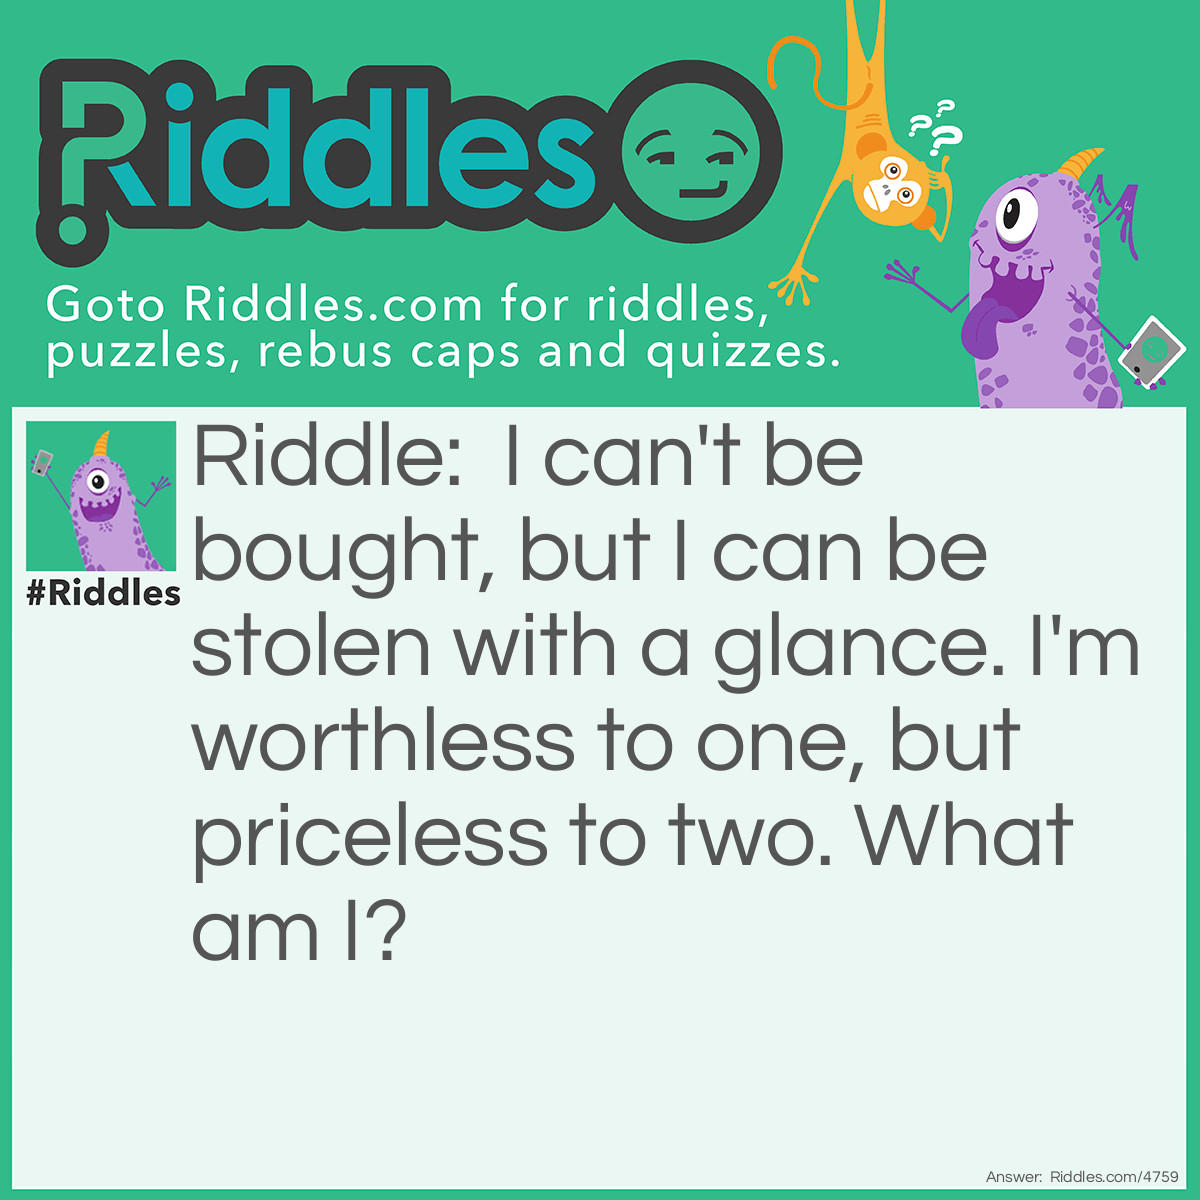 Riddle: I can't be bought, but I can be stolen with a glance. I'm worthless to one, but priceless to two. What am I? Answer: Love.